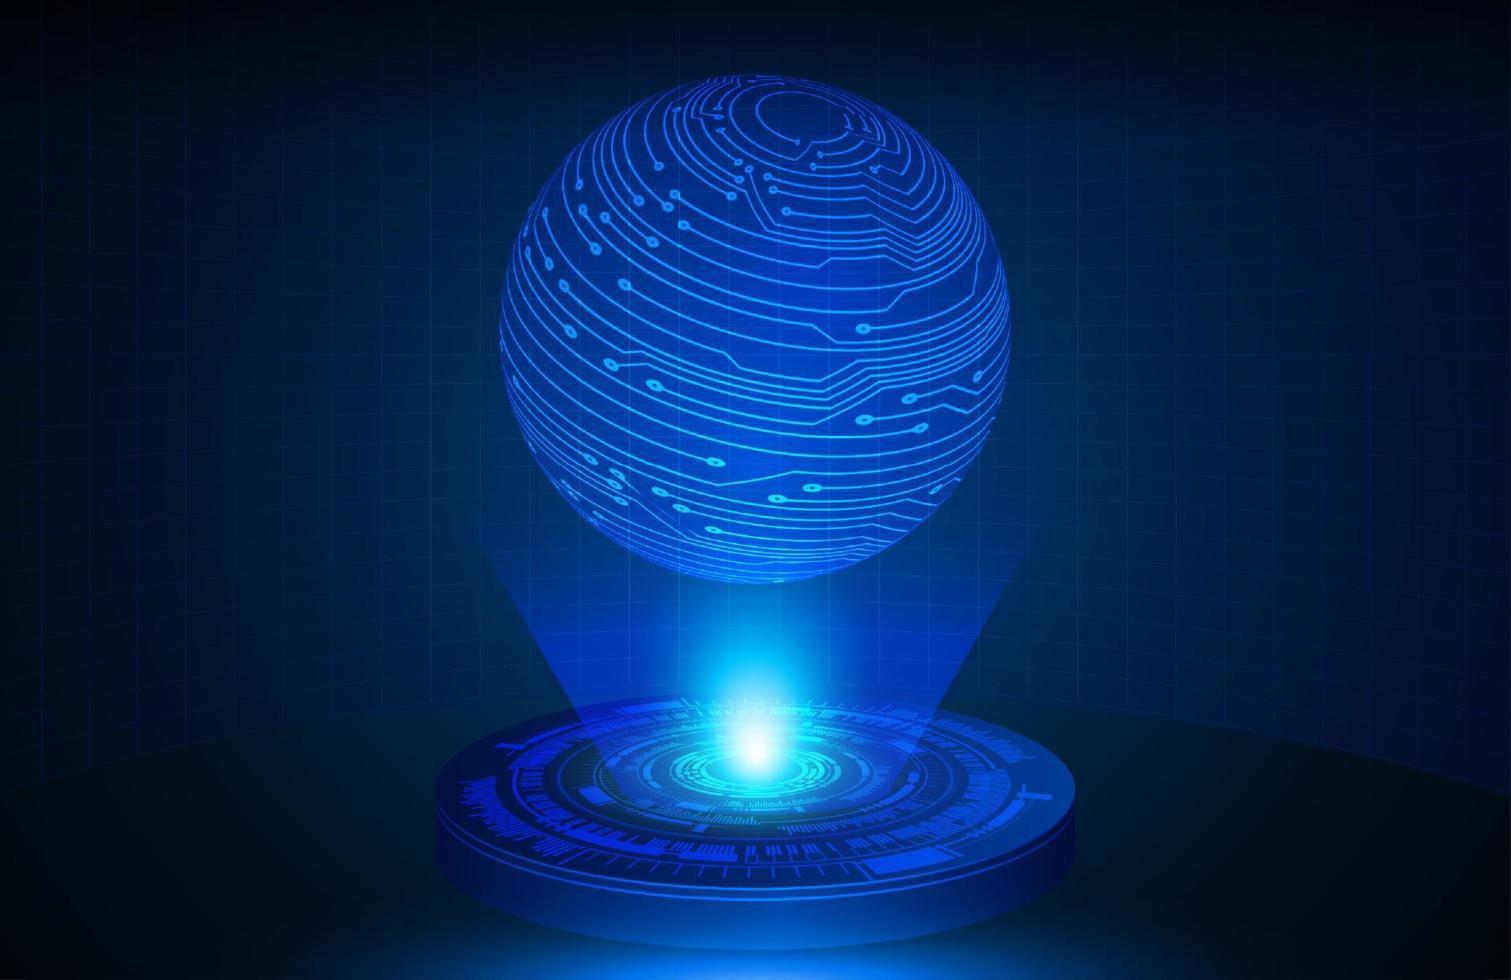 Globe Holographic Projector on Technology Background vector